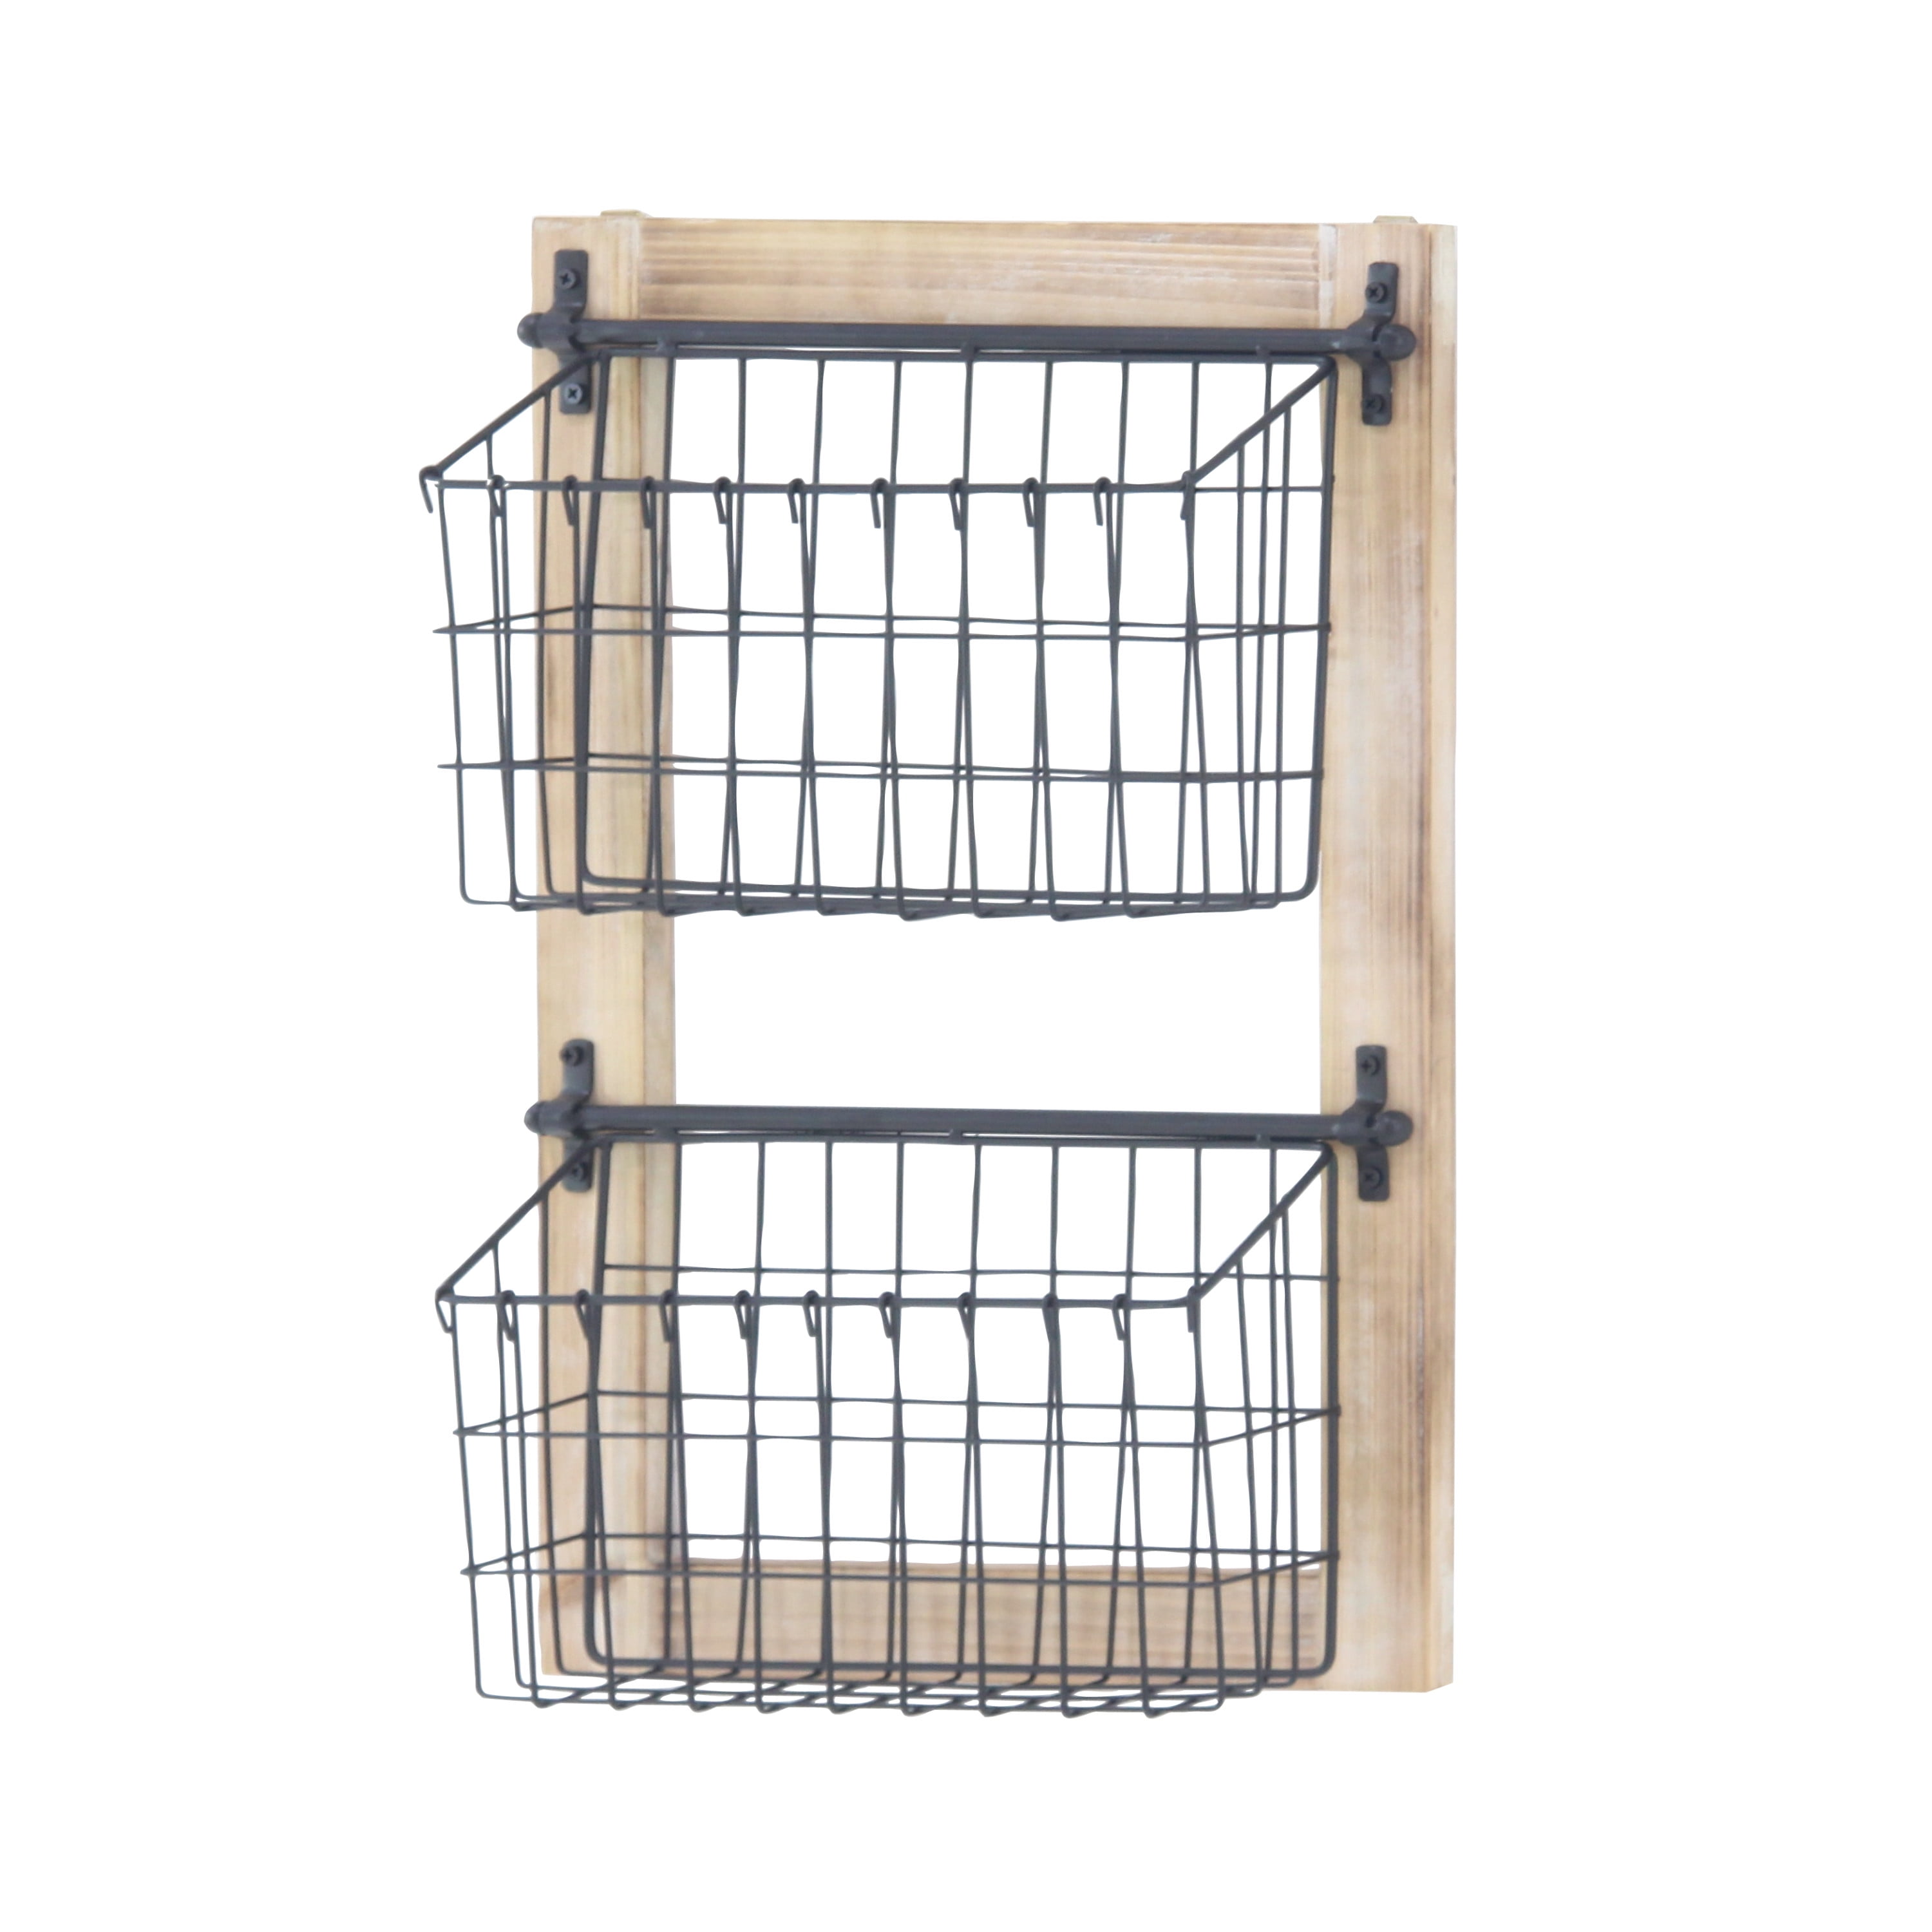 SET OF 3 WELDED METAL WIRE BASKETS RUSTIC COUNTRY STYLE USED IN